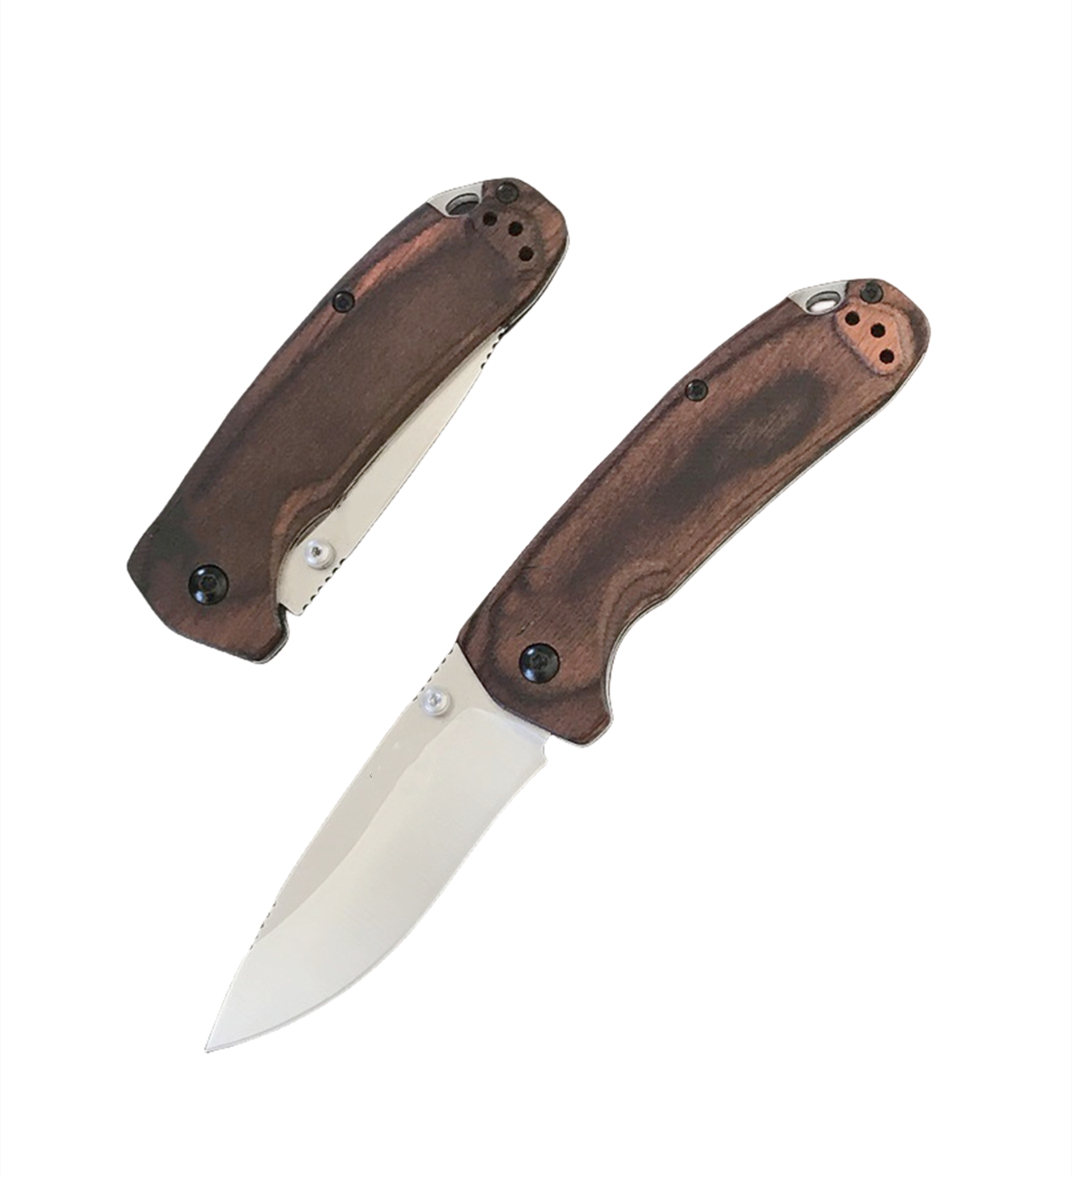 High Quality BM15031 Folding Knife S30v Satin Drop Point Blade Wood with Steel Sheet Handle Outdoor Camping Hiking Fishing EDC Pocket Knives